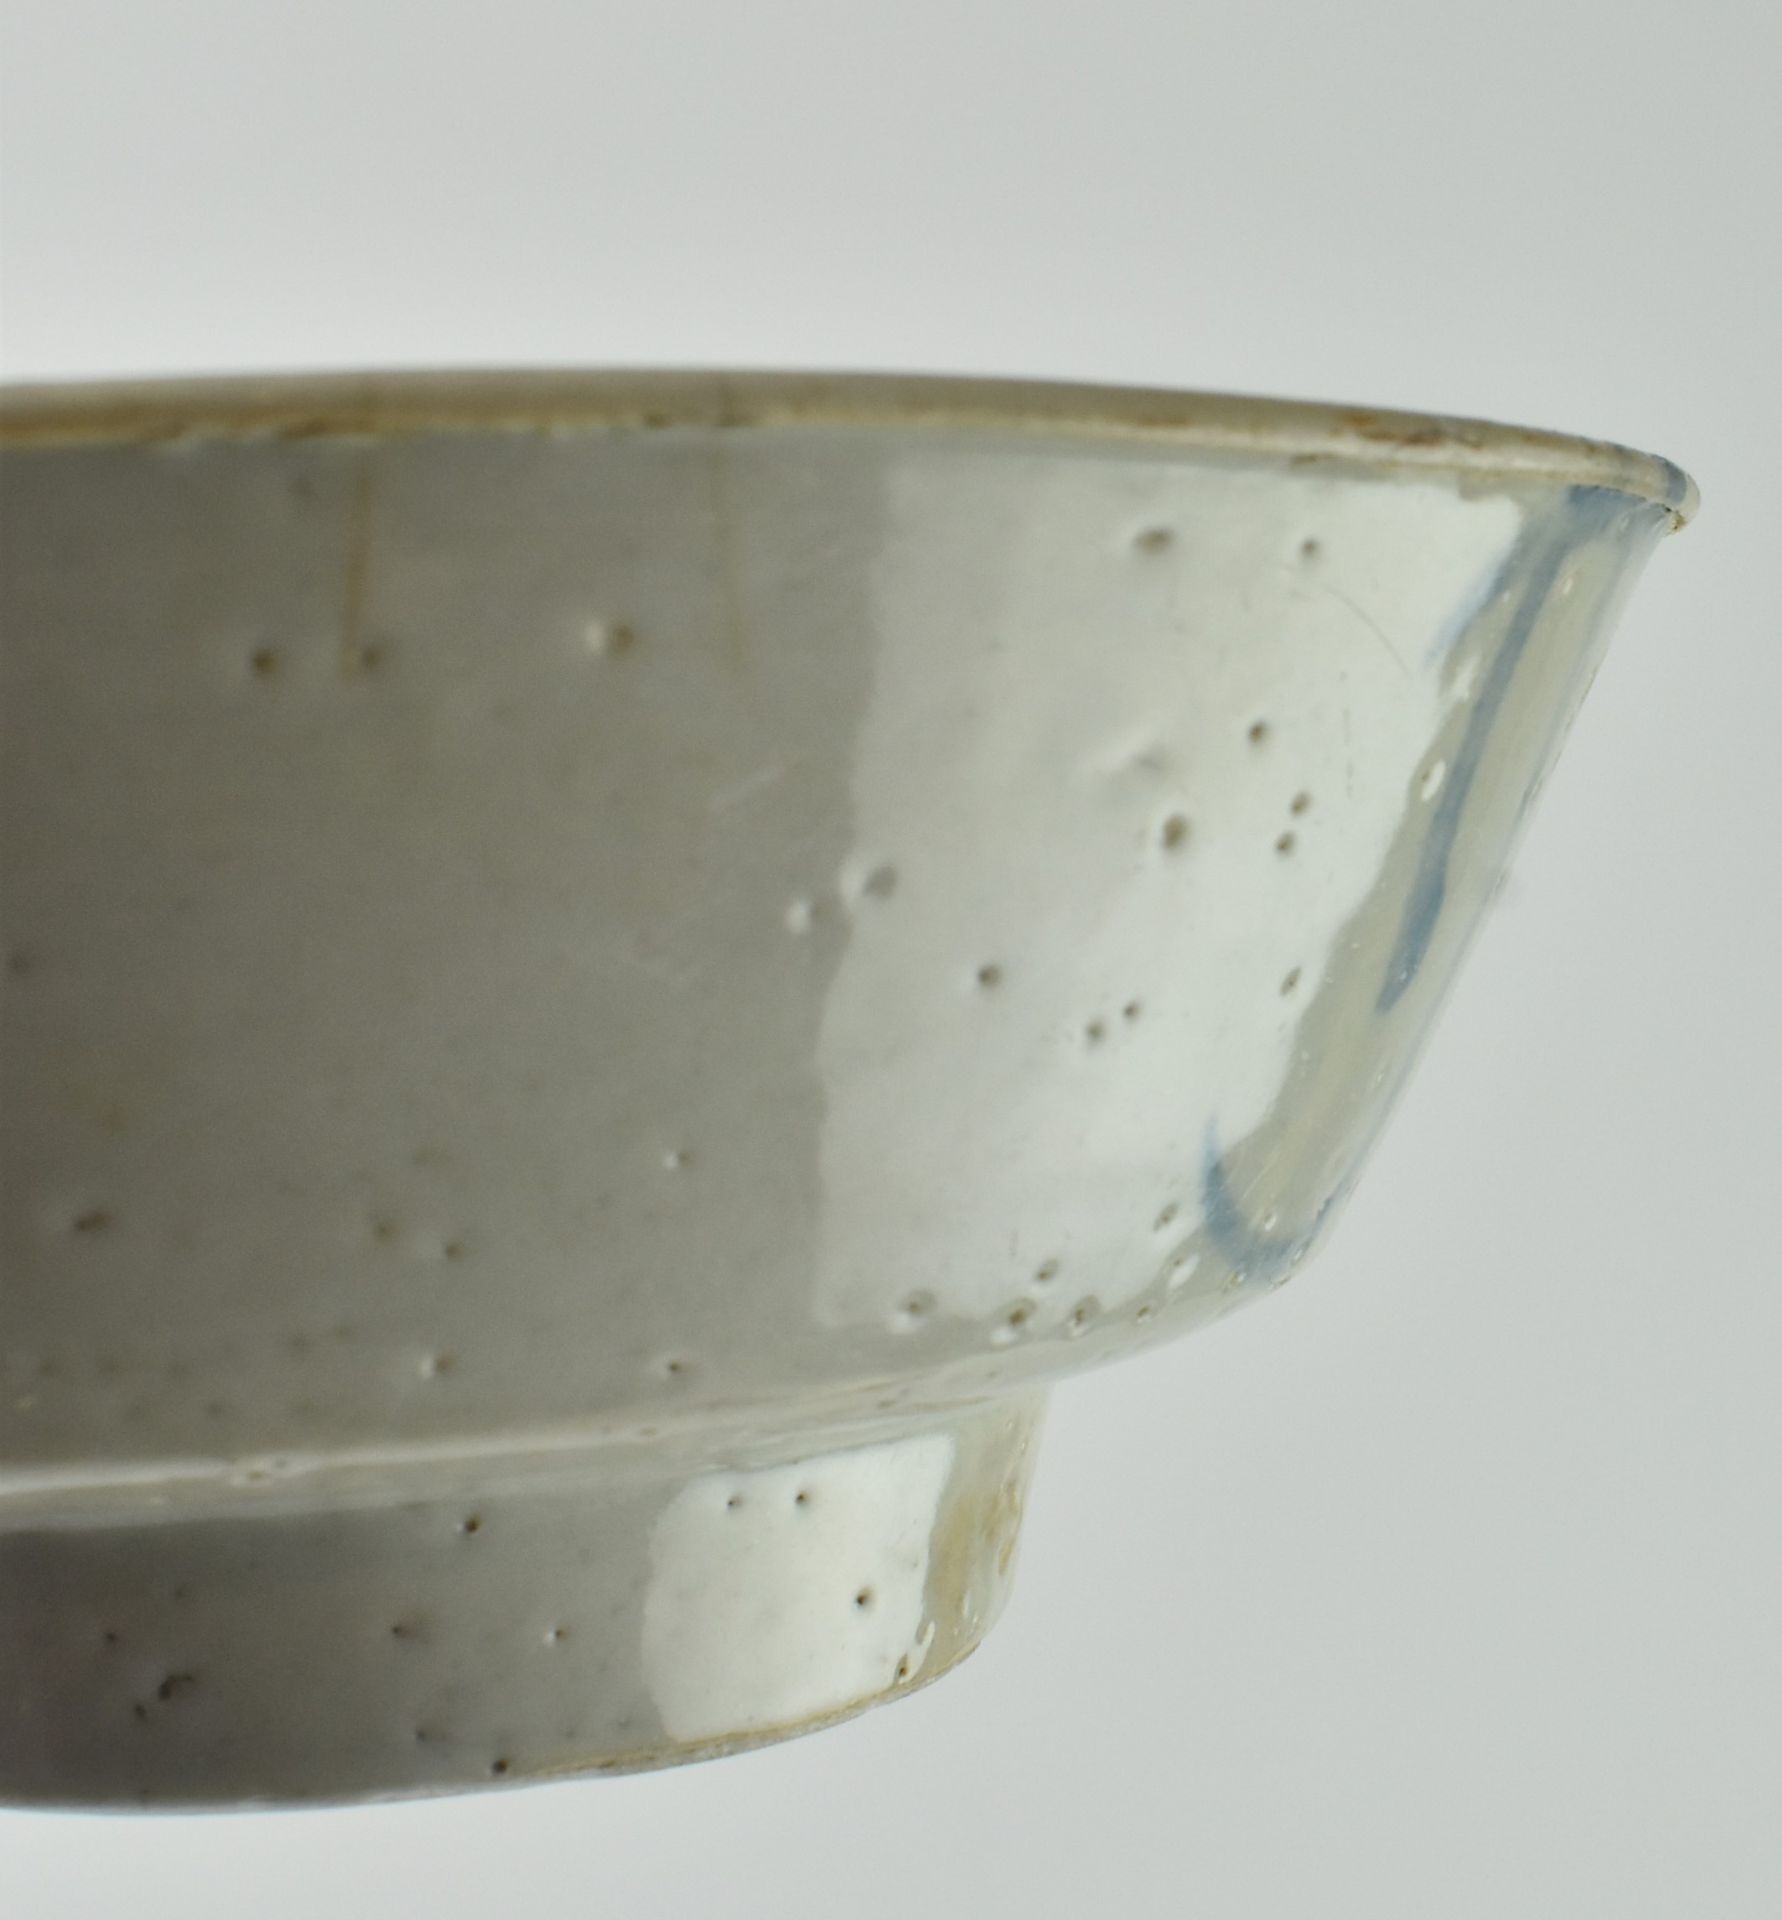 TWO ZHANGZHOU SWATOW WARE BLUE AND WHITE BOWLS 汕头碗两个 - Image 6 of 7